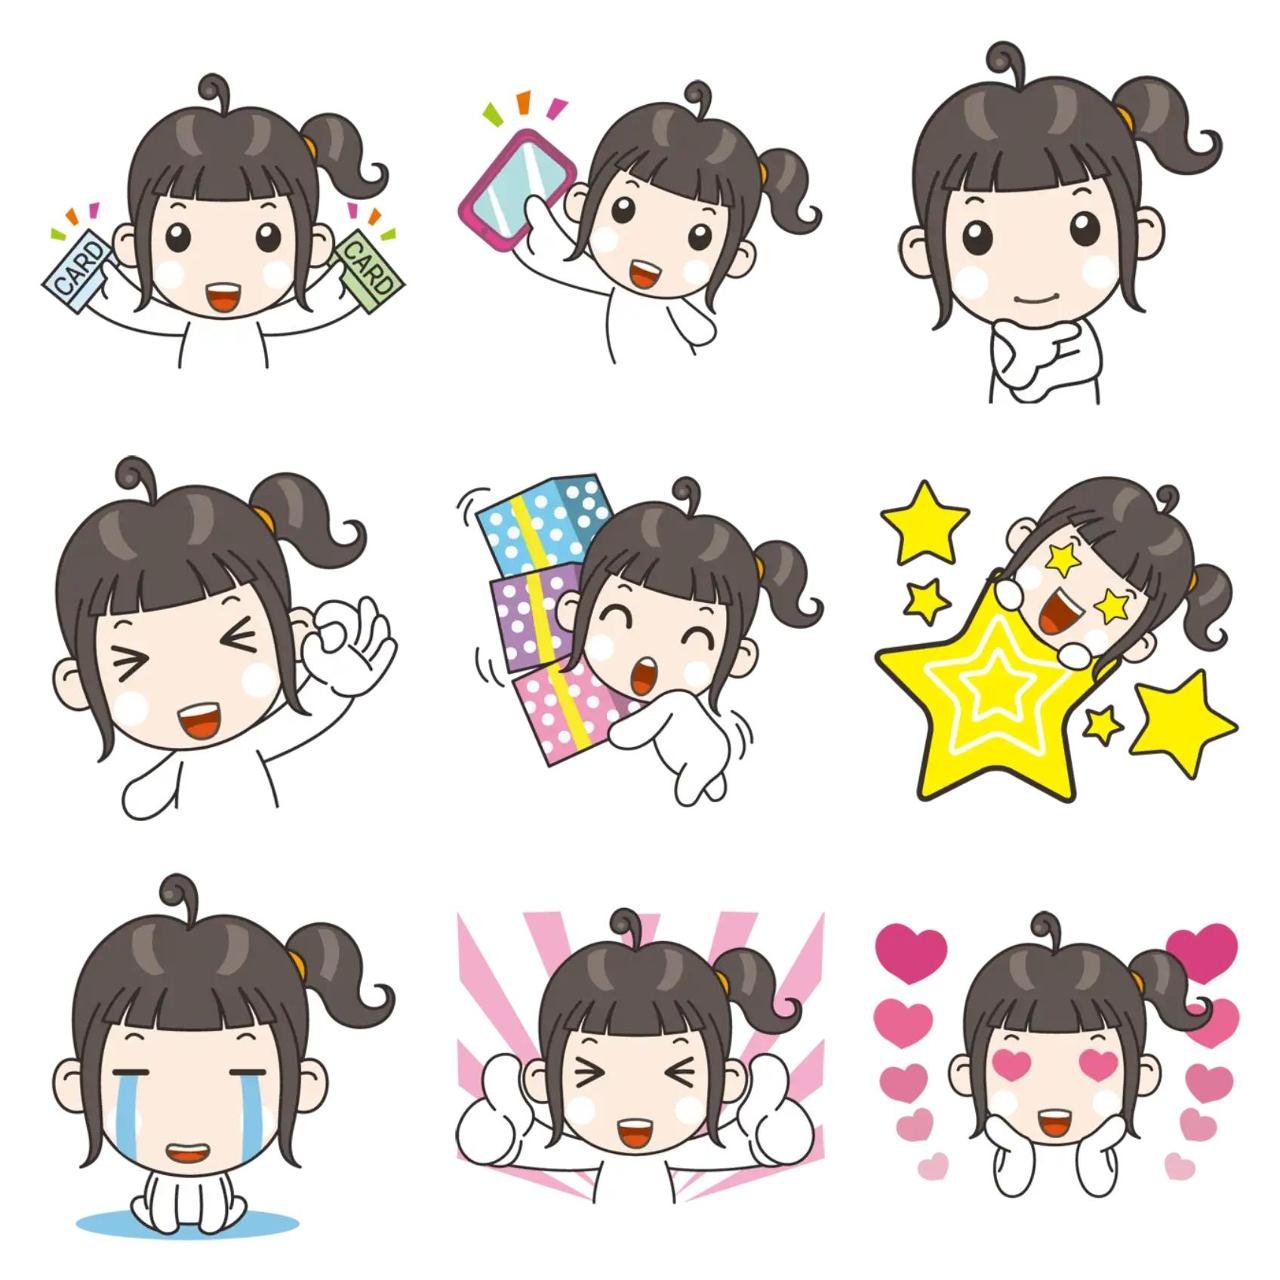 Poungirl Gag,People sticker pack for Whatsapp, Telegram, Signal, and others chatting and message apps